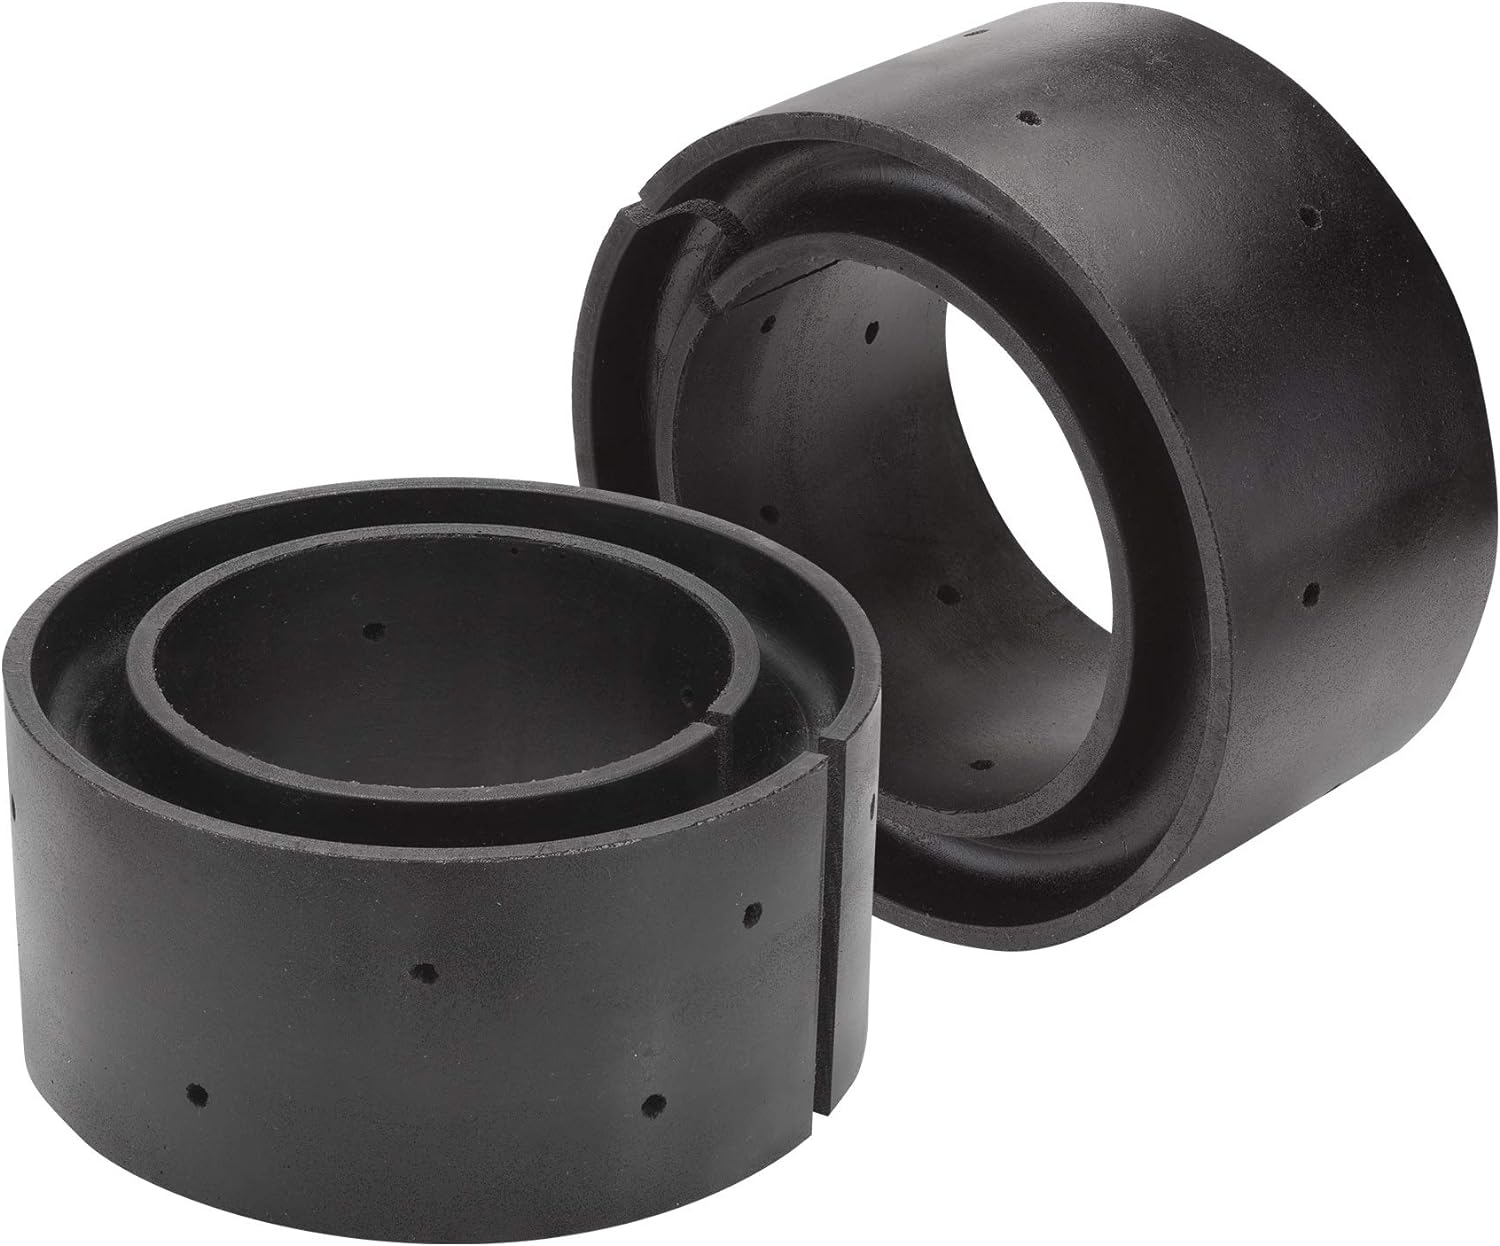 SuperSprings CSS-1225 | Coil SumoSprings for various applications | 2.25 inch inner wall height, black